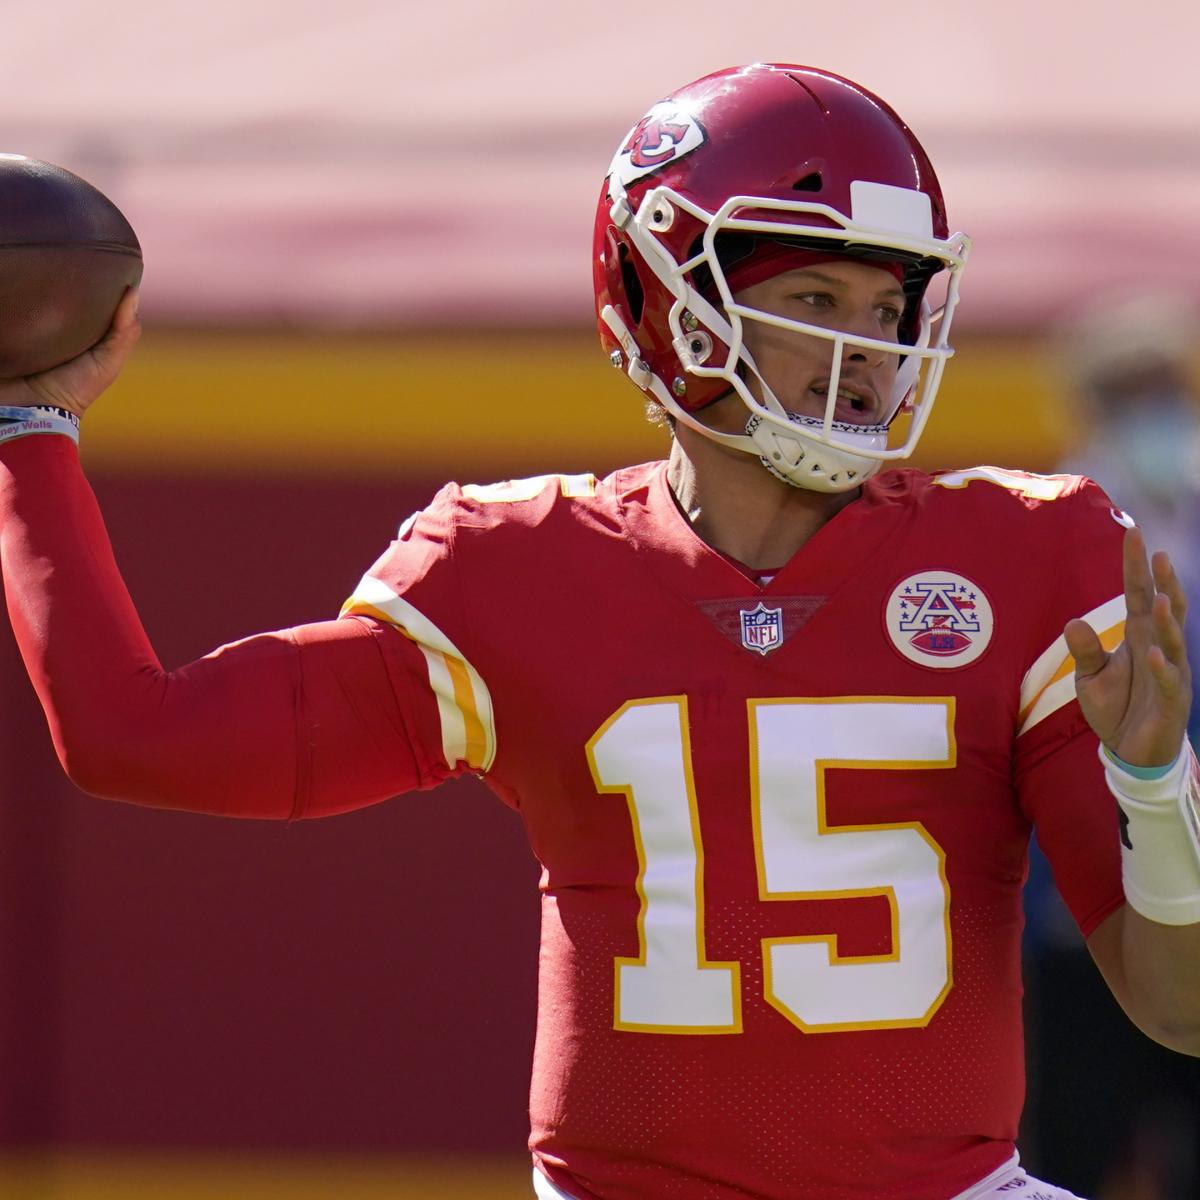 Patrick Mahomes Card Sequence Being Offered by House owners for $7.5M